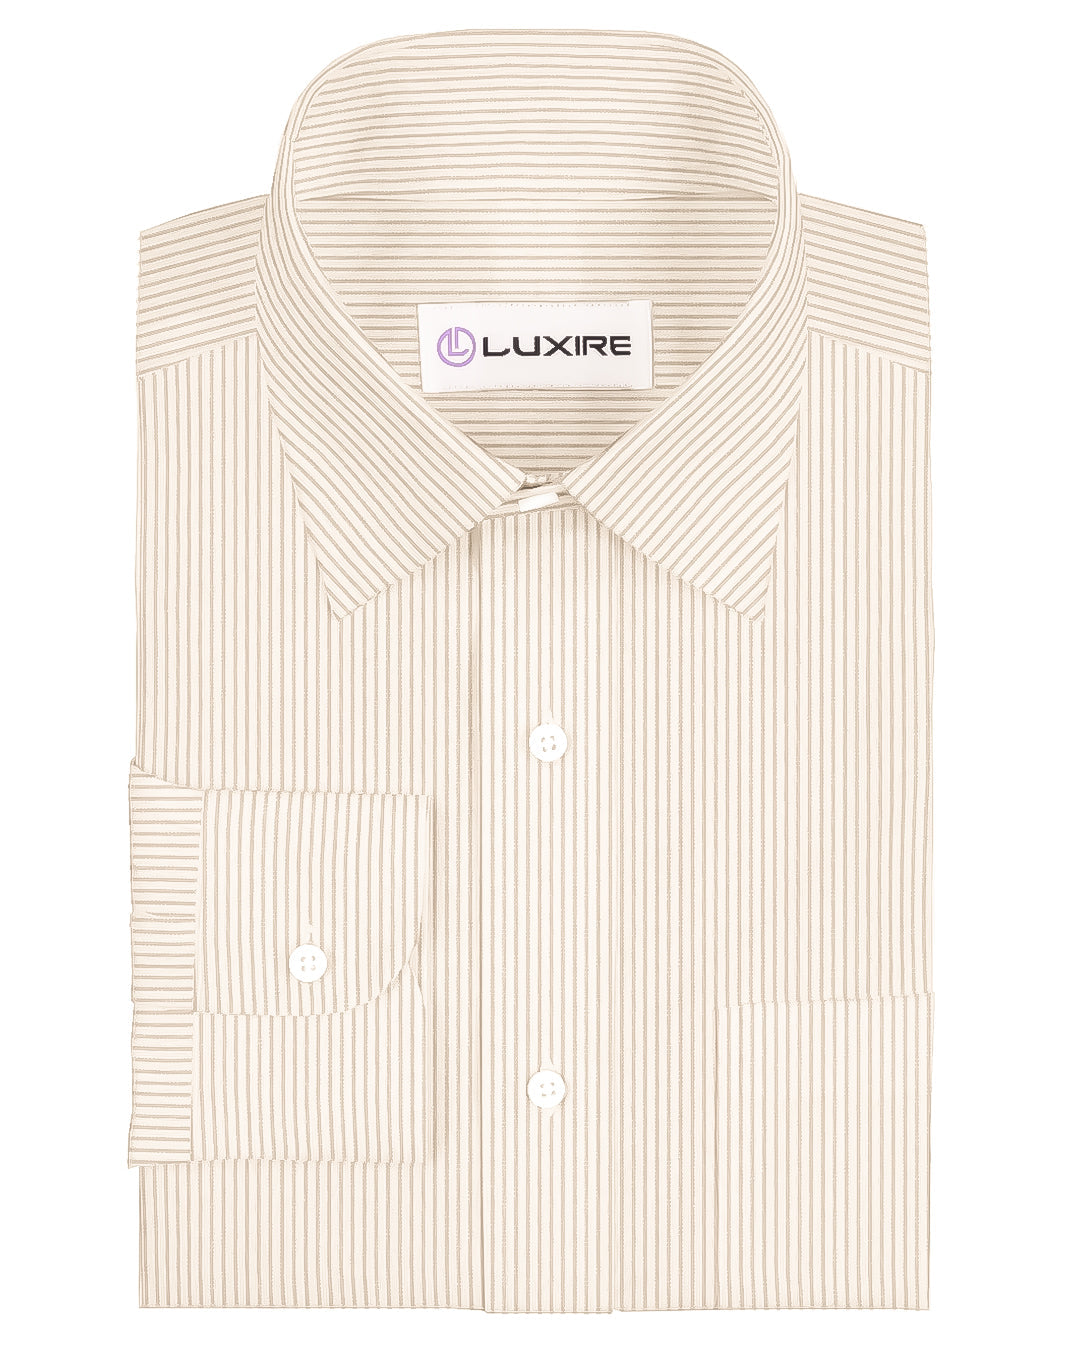 Front of the custom linen shirt for men in white with brown dress stripes by Luxire Clothing